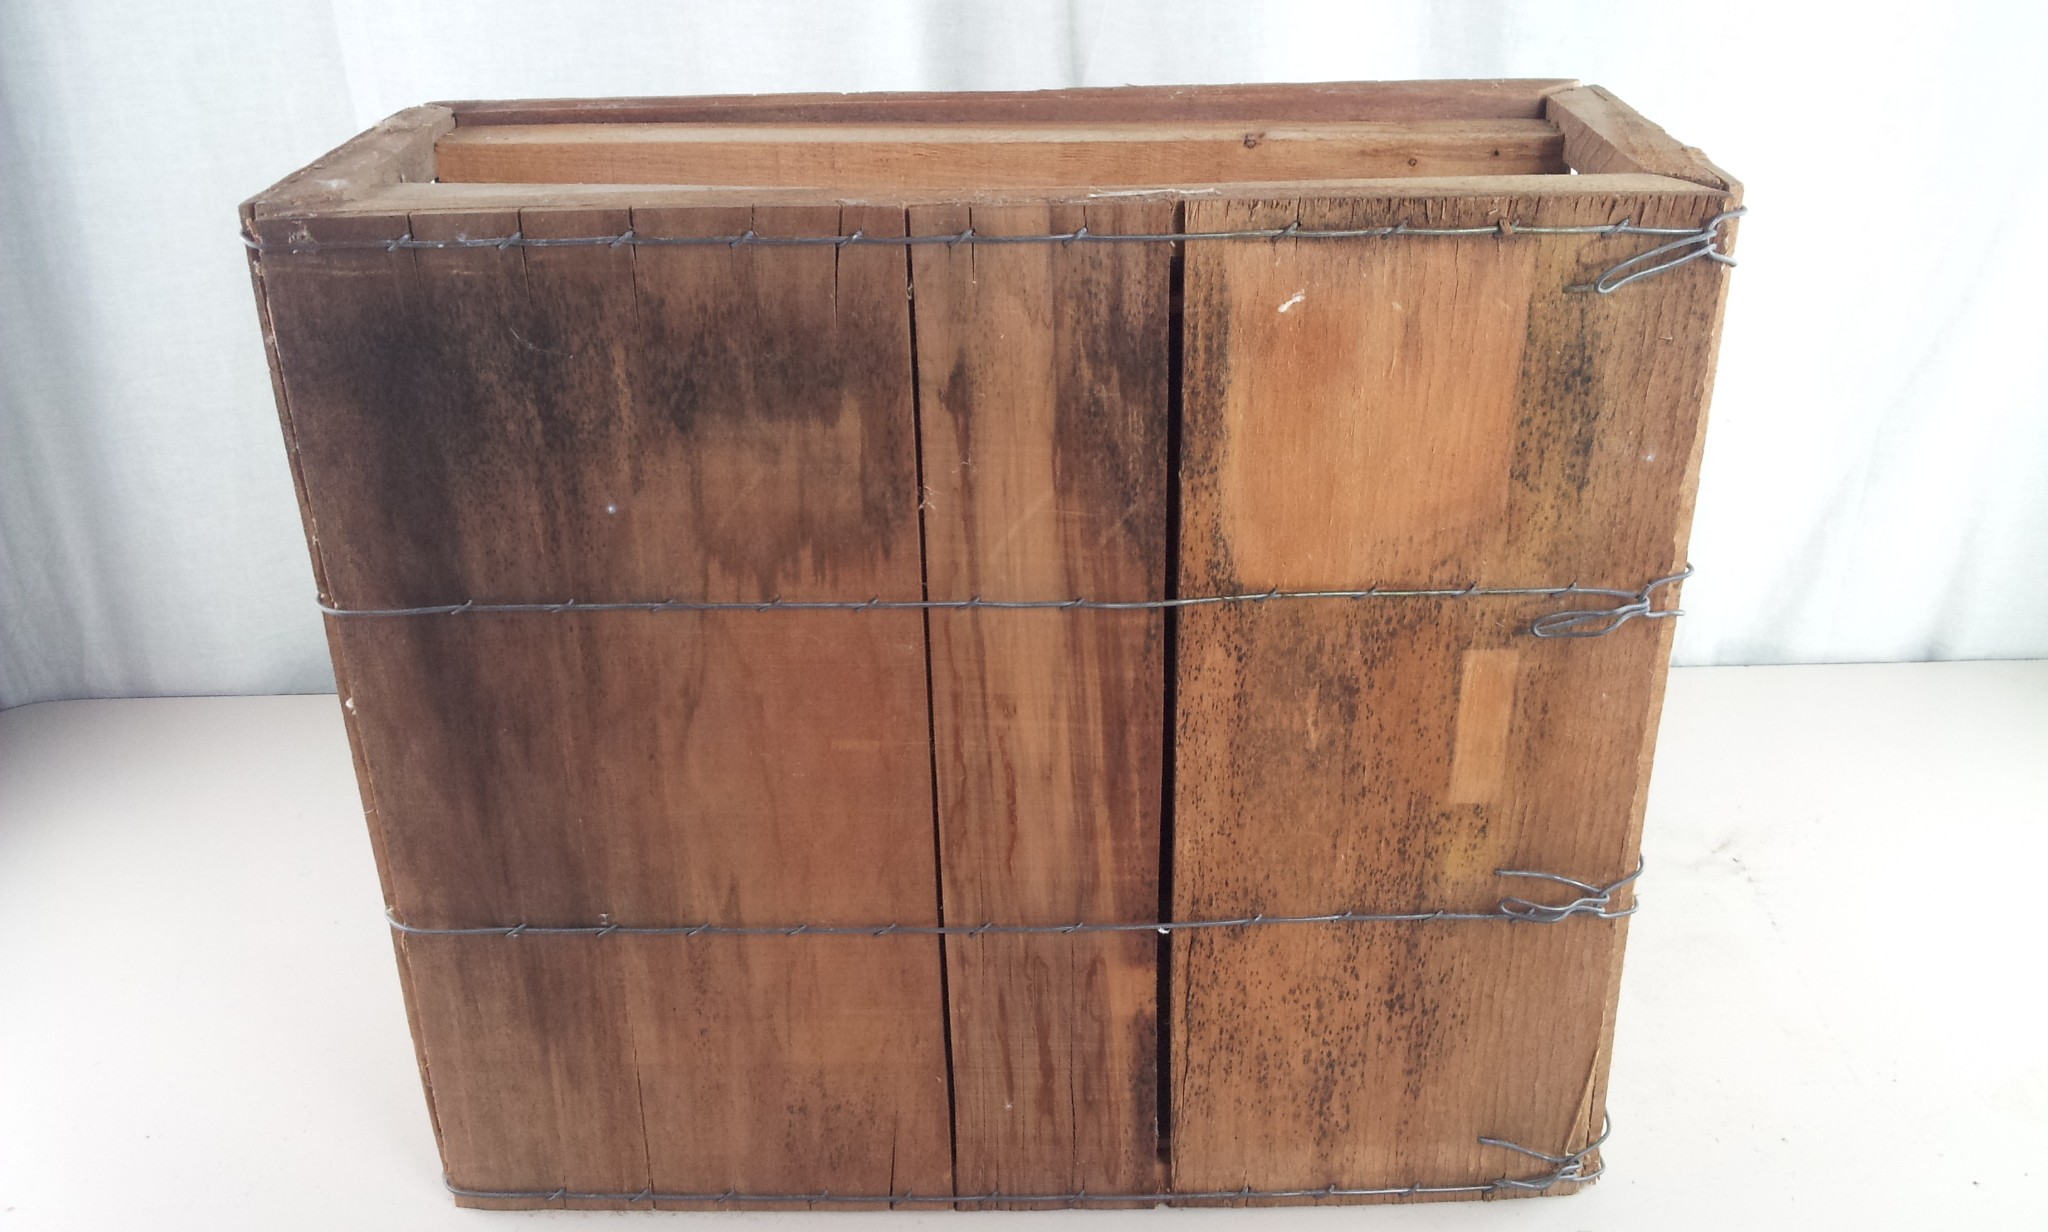 Wire Bound Wood Box 20.5" x 17.5" x 8"  Craft Projects